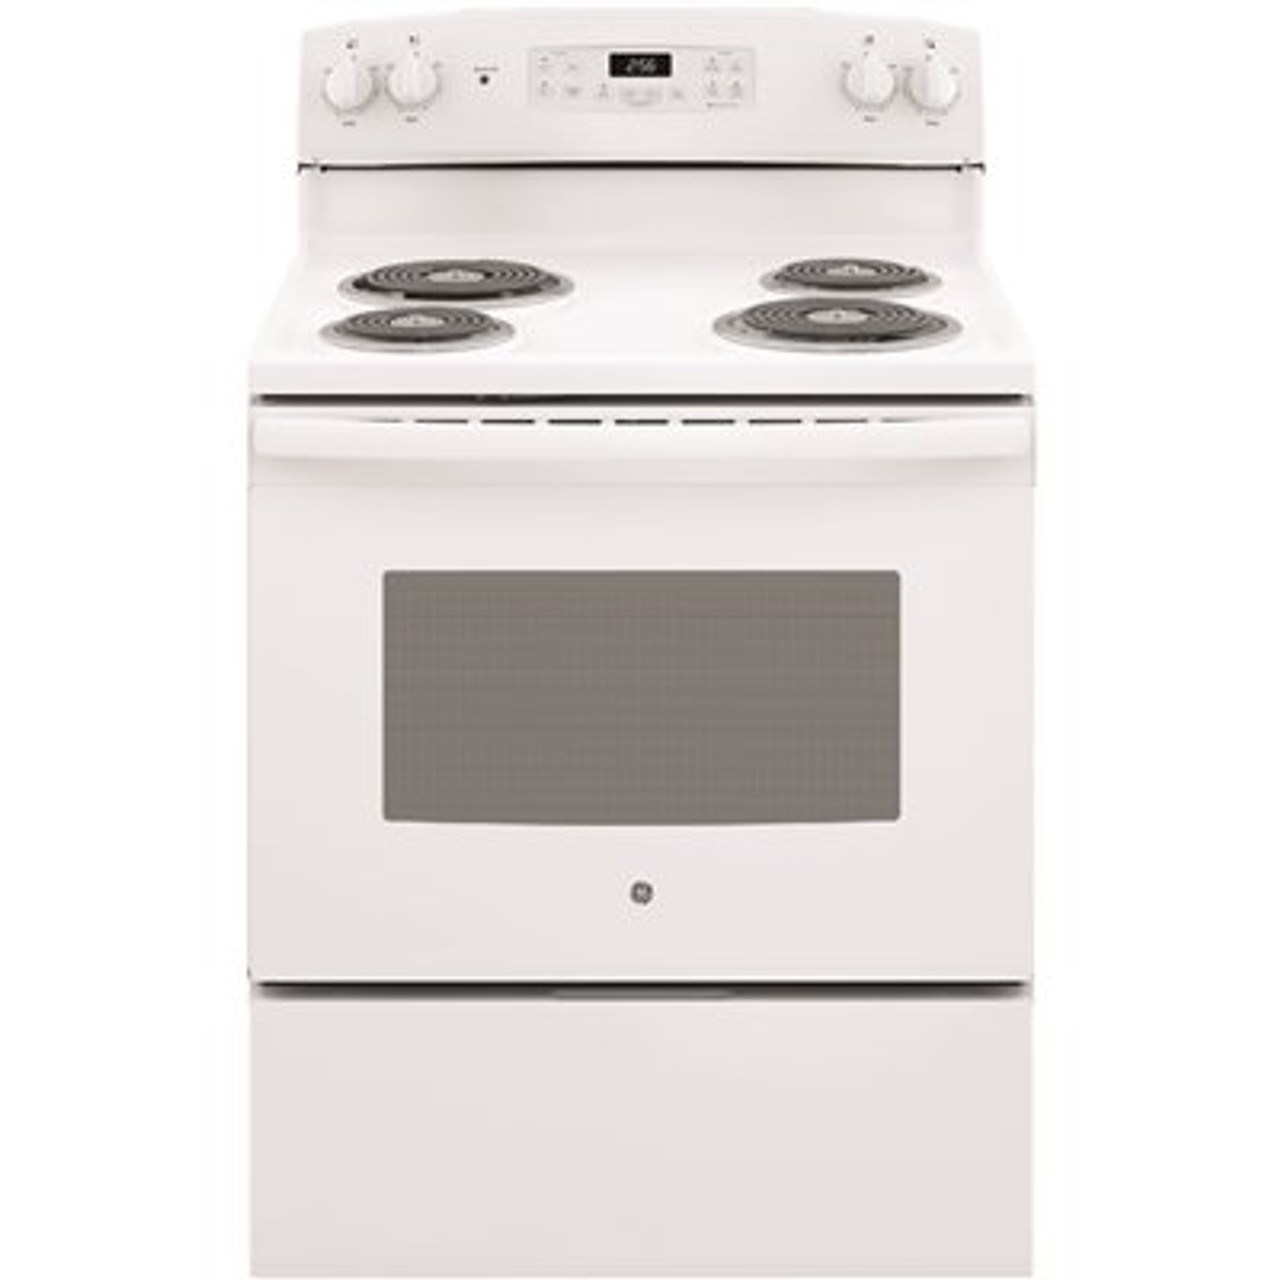 GE 30 in. 5.0 cu. ft. Electric Range with Self-Cleaning Oven in. White